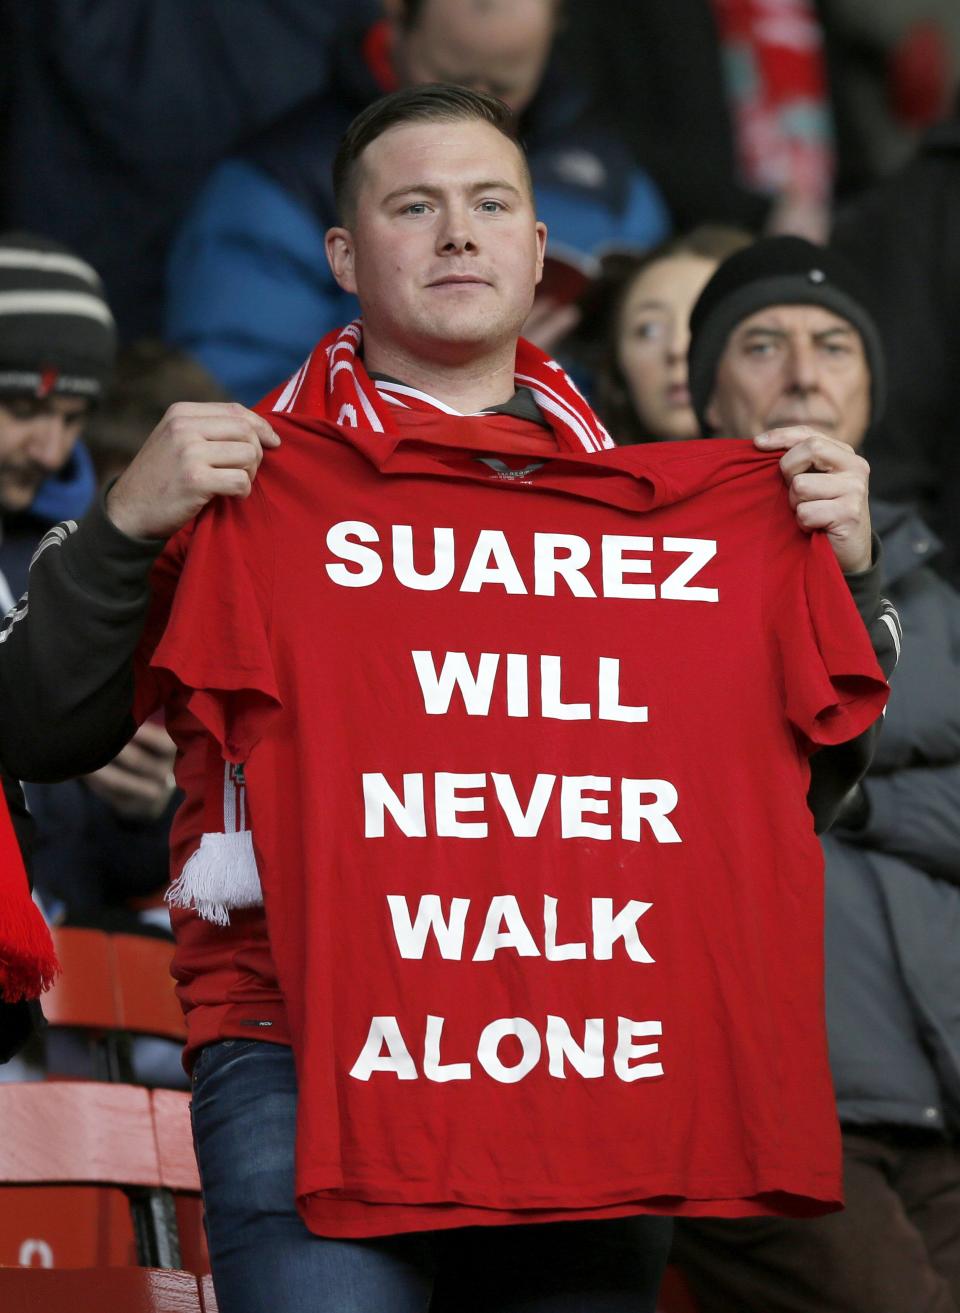 A Liverpool fan holds up a football shirt before their English Premier League soccer match against Fulham at Anfield in Liverpool, northern England November 9, 2013.